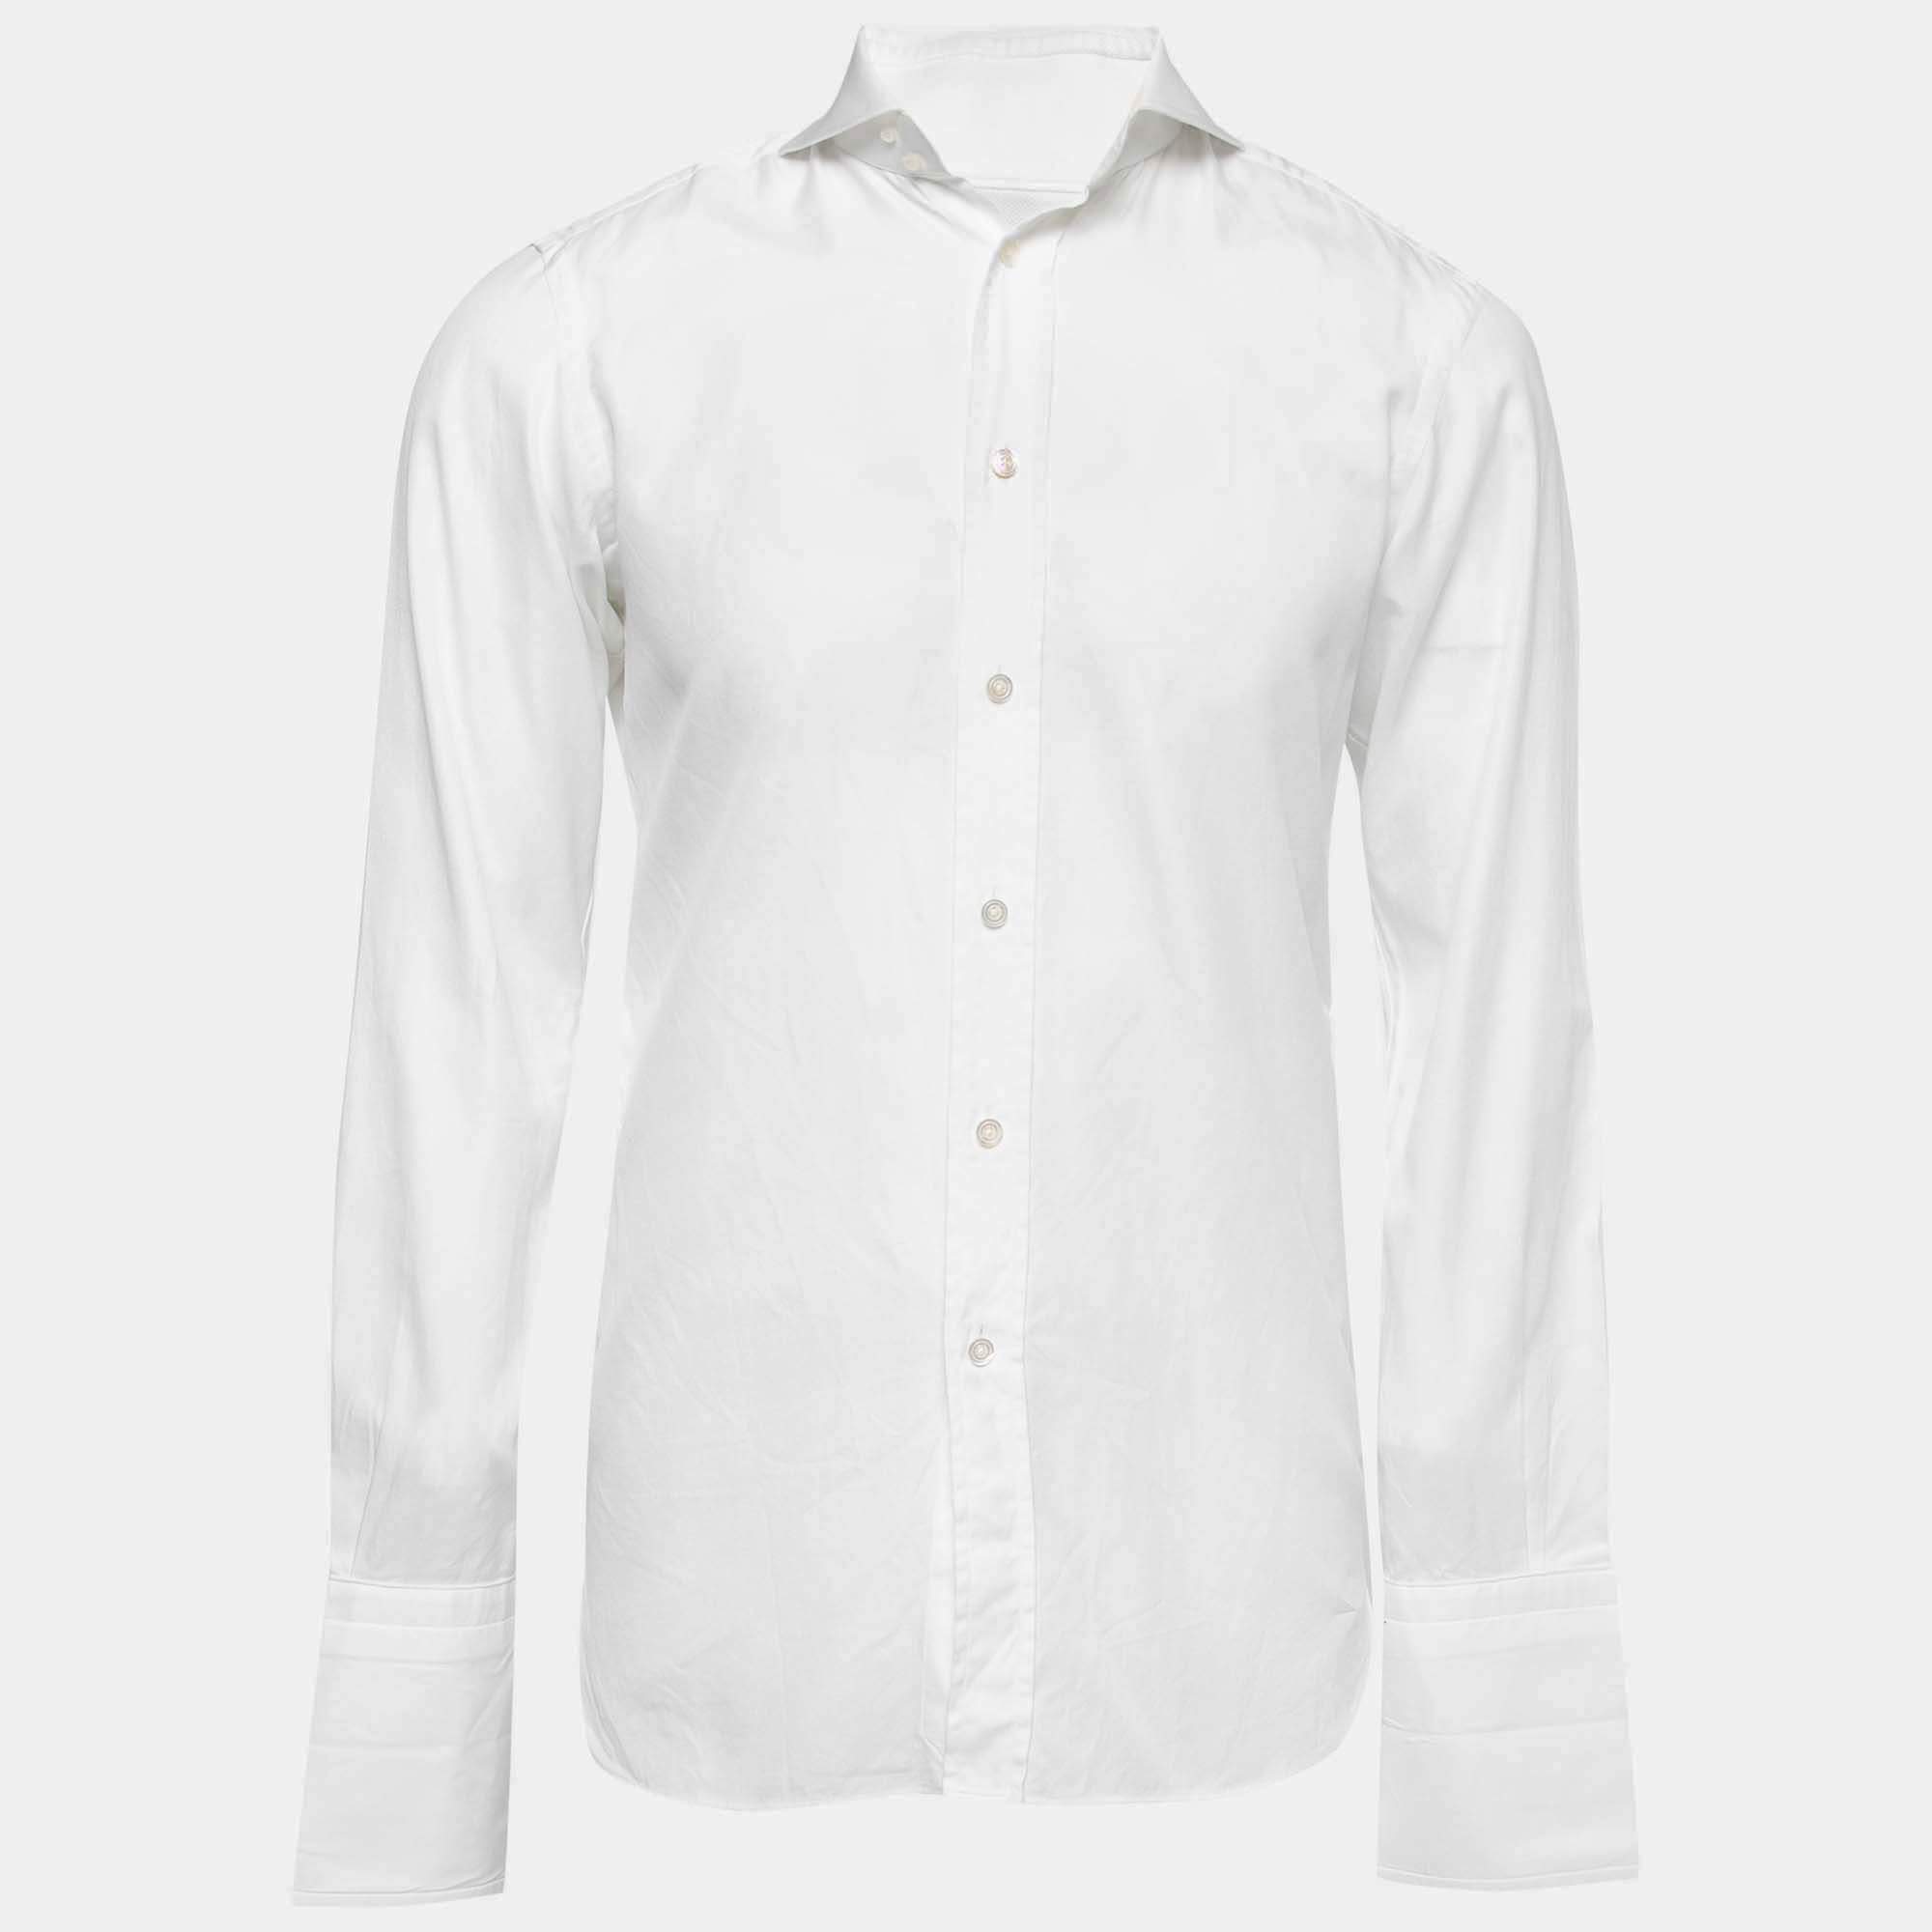 Tom Ford White Cotton French Cuffed Shirt S Tom Ford | TLC